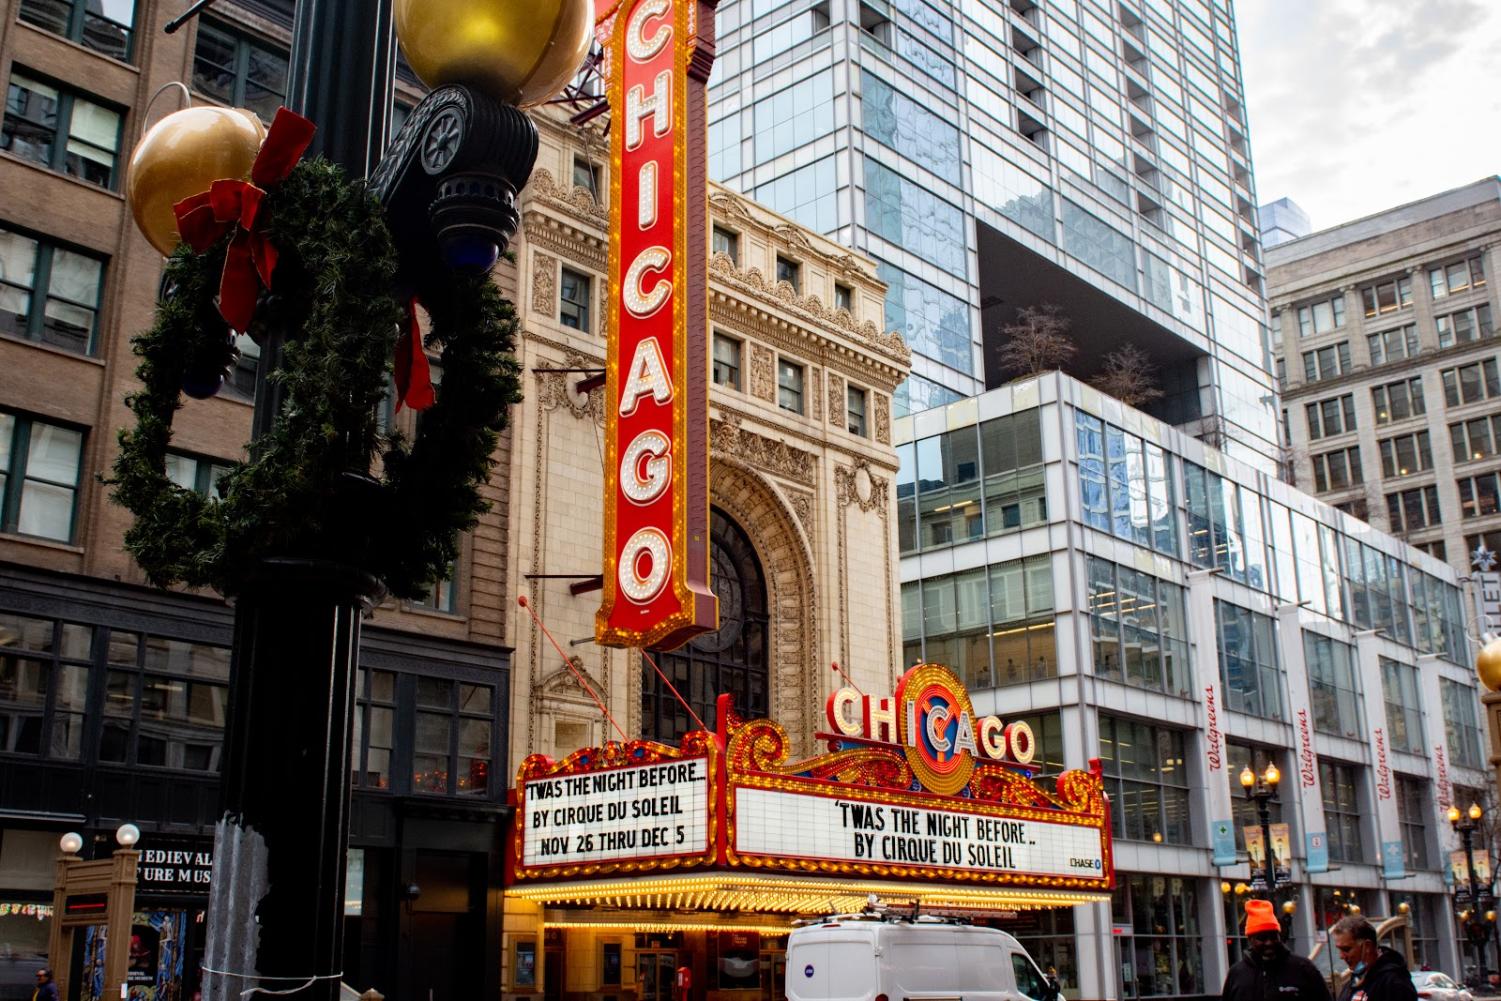 Red+vertical+sign+and+theater+banner+that+says+%E2%80%9CChicago%E2%80%9D+in+white+capital+letters.+To+the+left+on+a+black+pole+is+a+green+wreath.